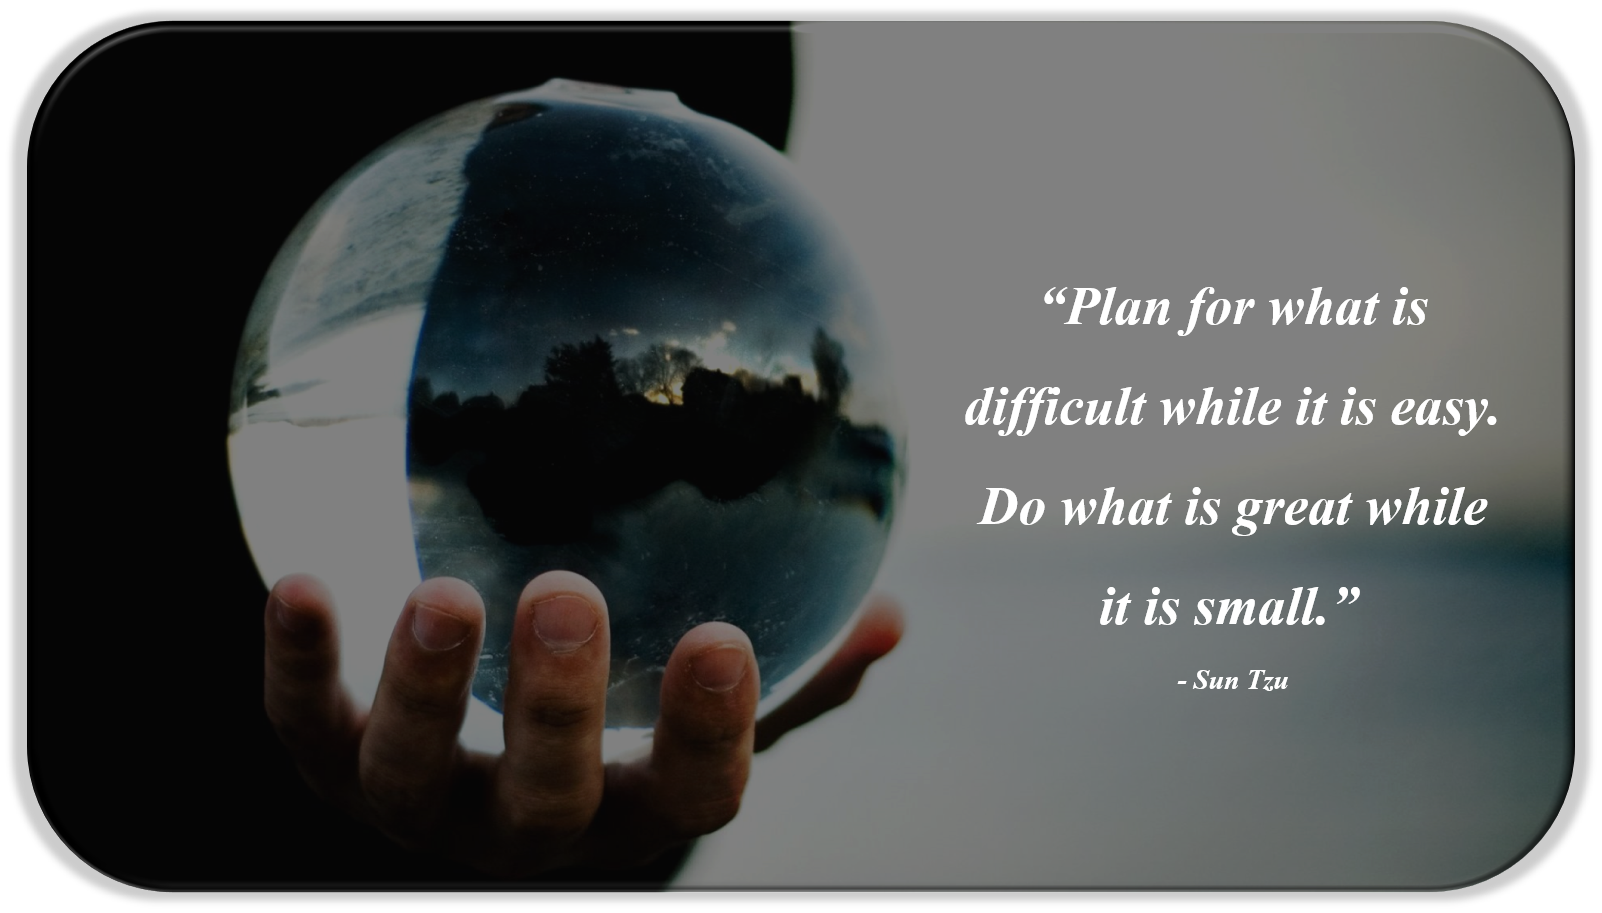 “Plan for what is difficult while it is easy. Do what is great while it is small.”  - Sun Tzu